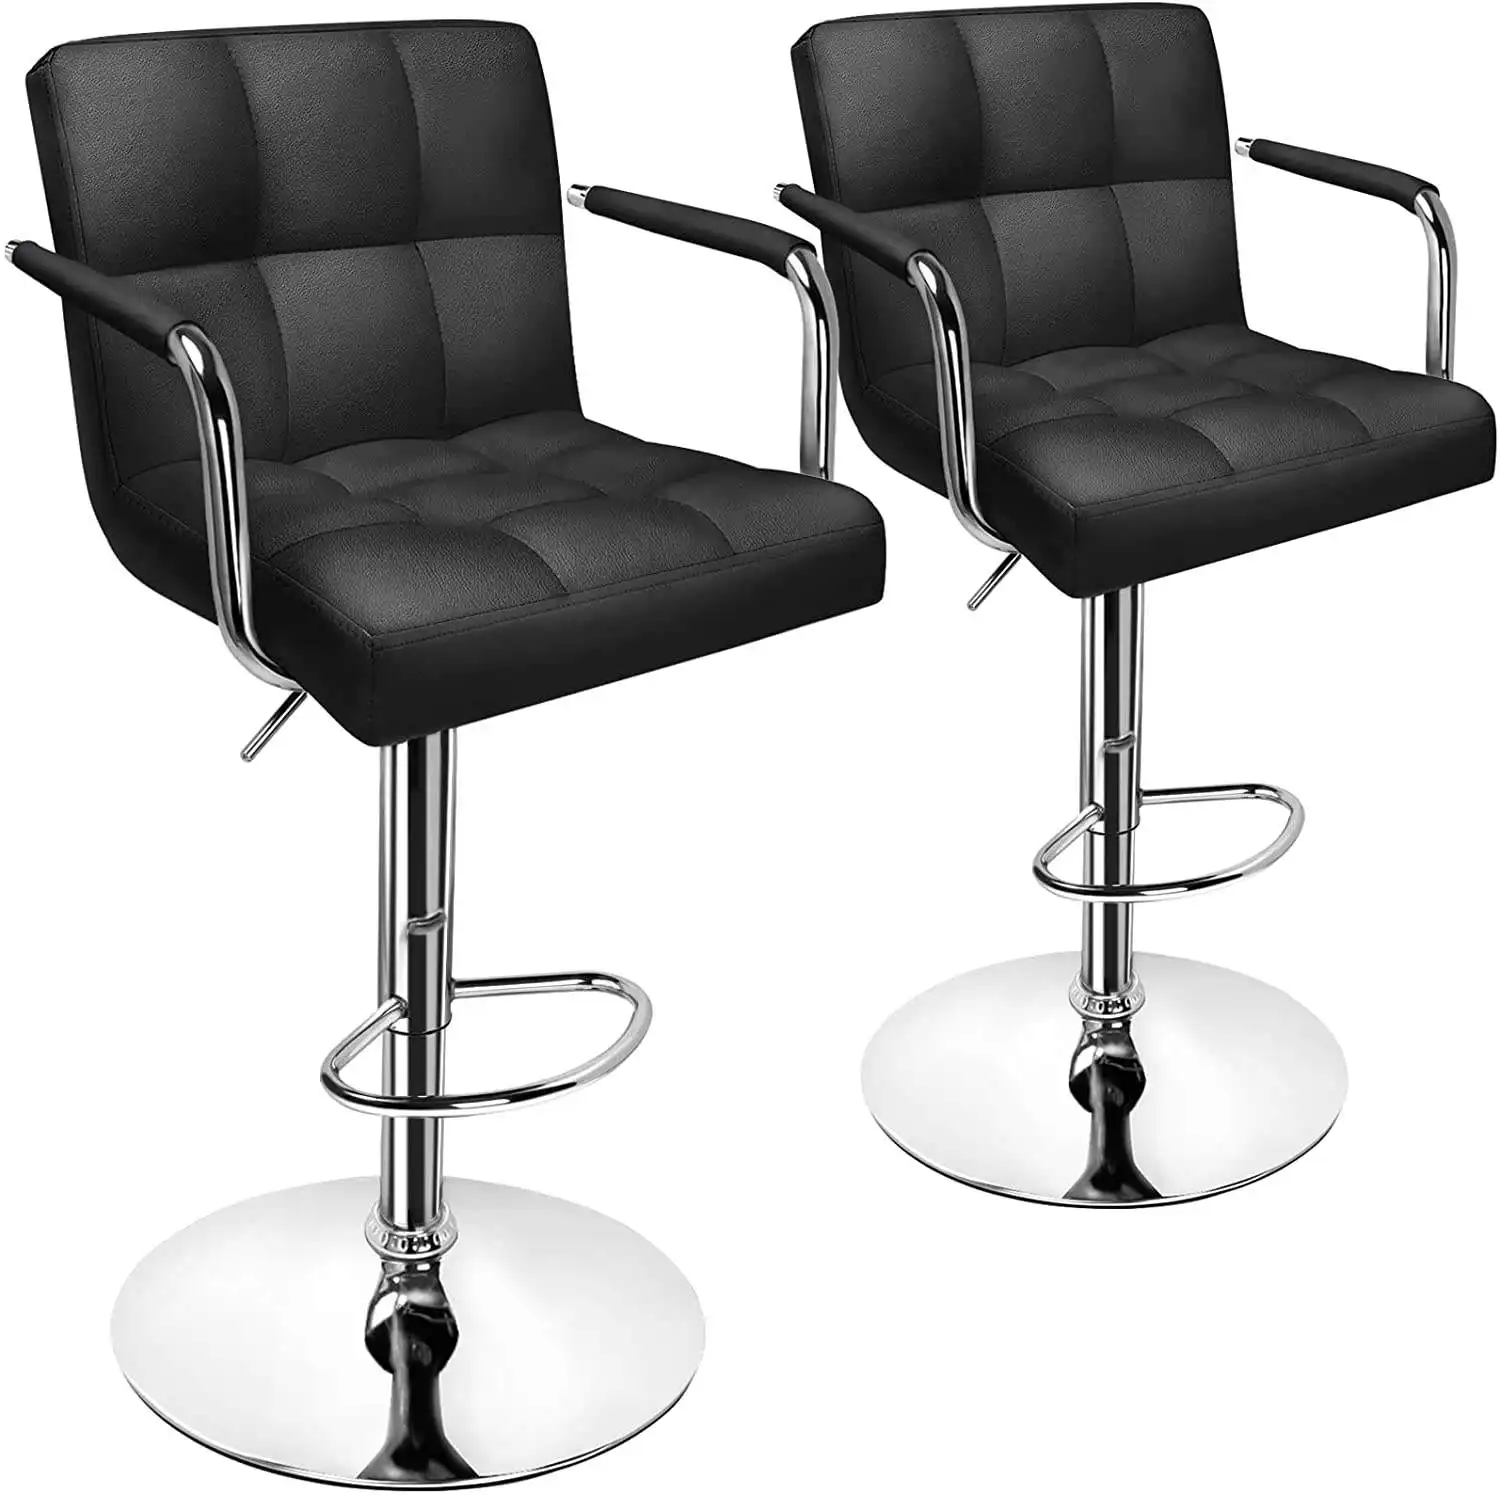 Modern comfortable leather height adjustable swivel black bar chairs with armrest